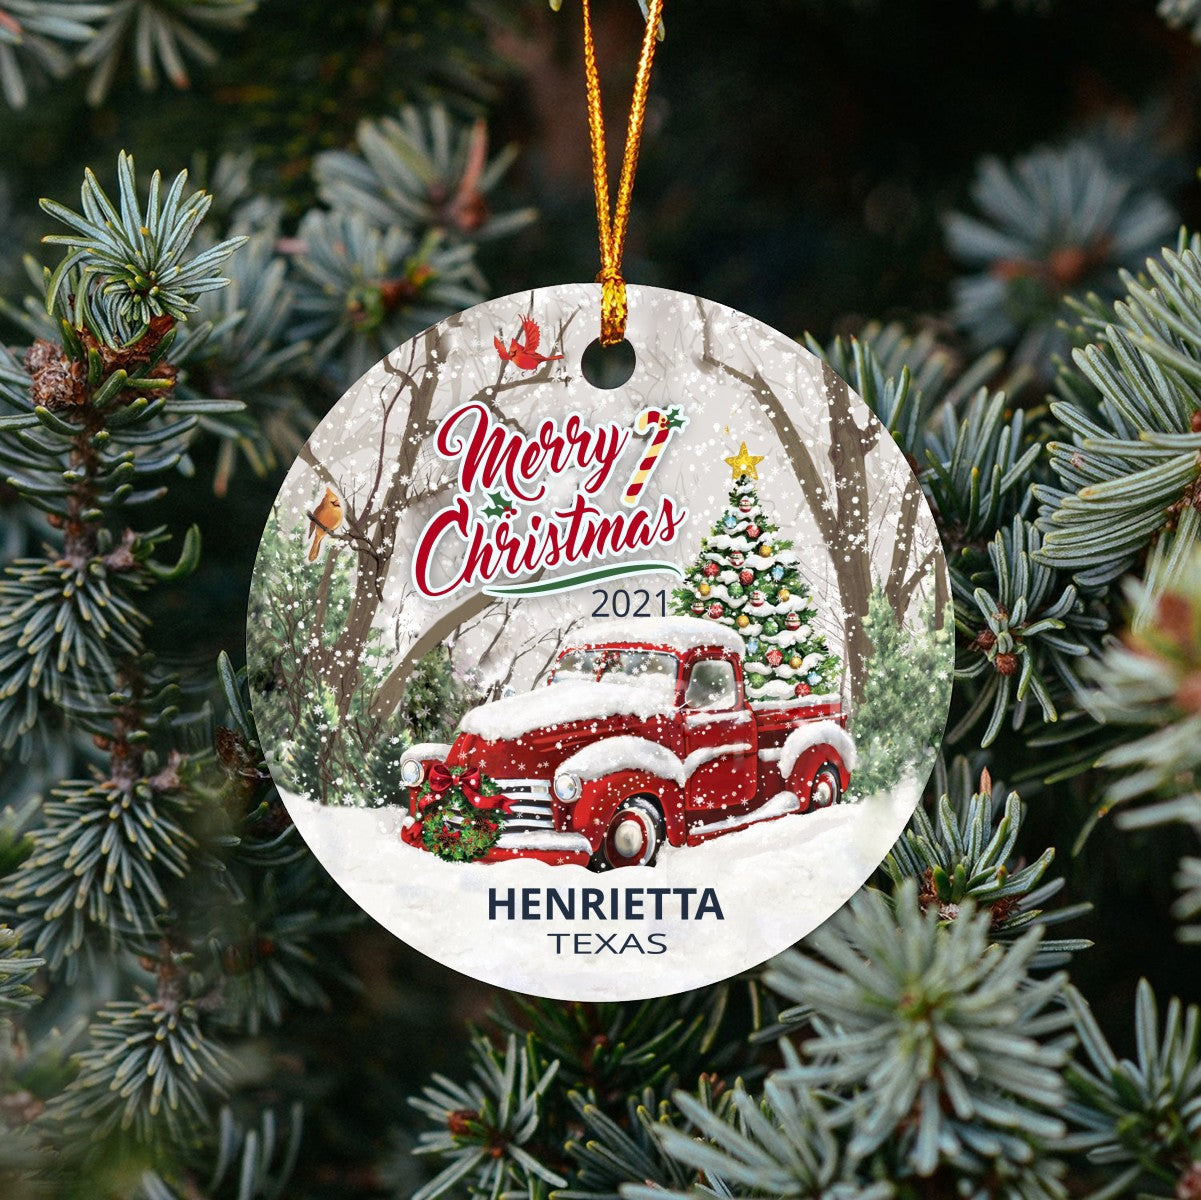 Christmas Tree Ornaments Henrietta - Ornament With Name City, State Henrietta Texas TX Ornament - Red Truck Xmas Ornaments 3'' Plastic Gift For Family, Friend And Housewarming